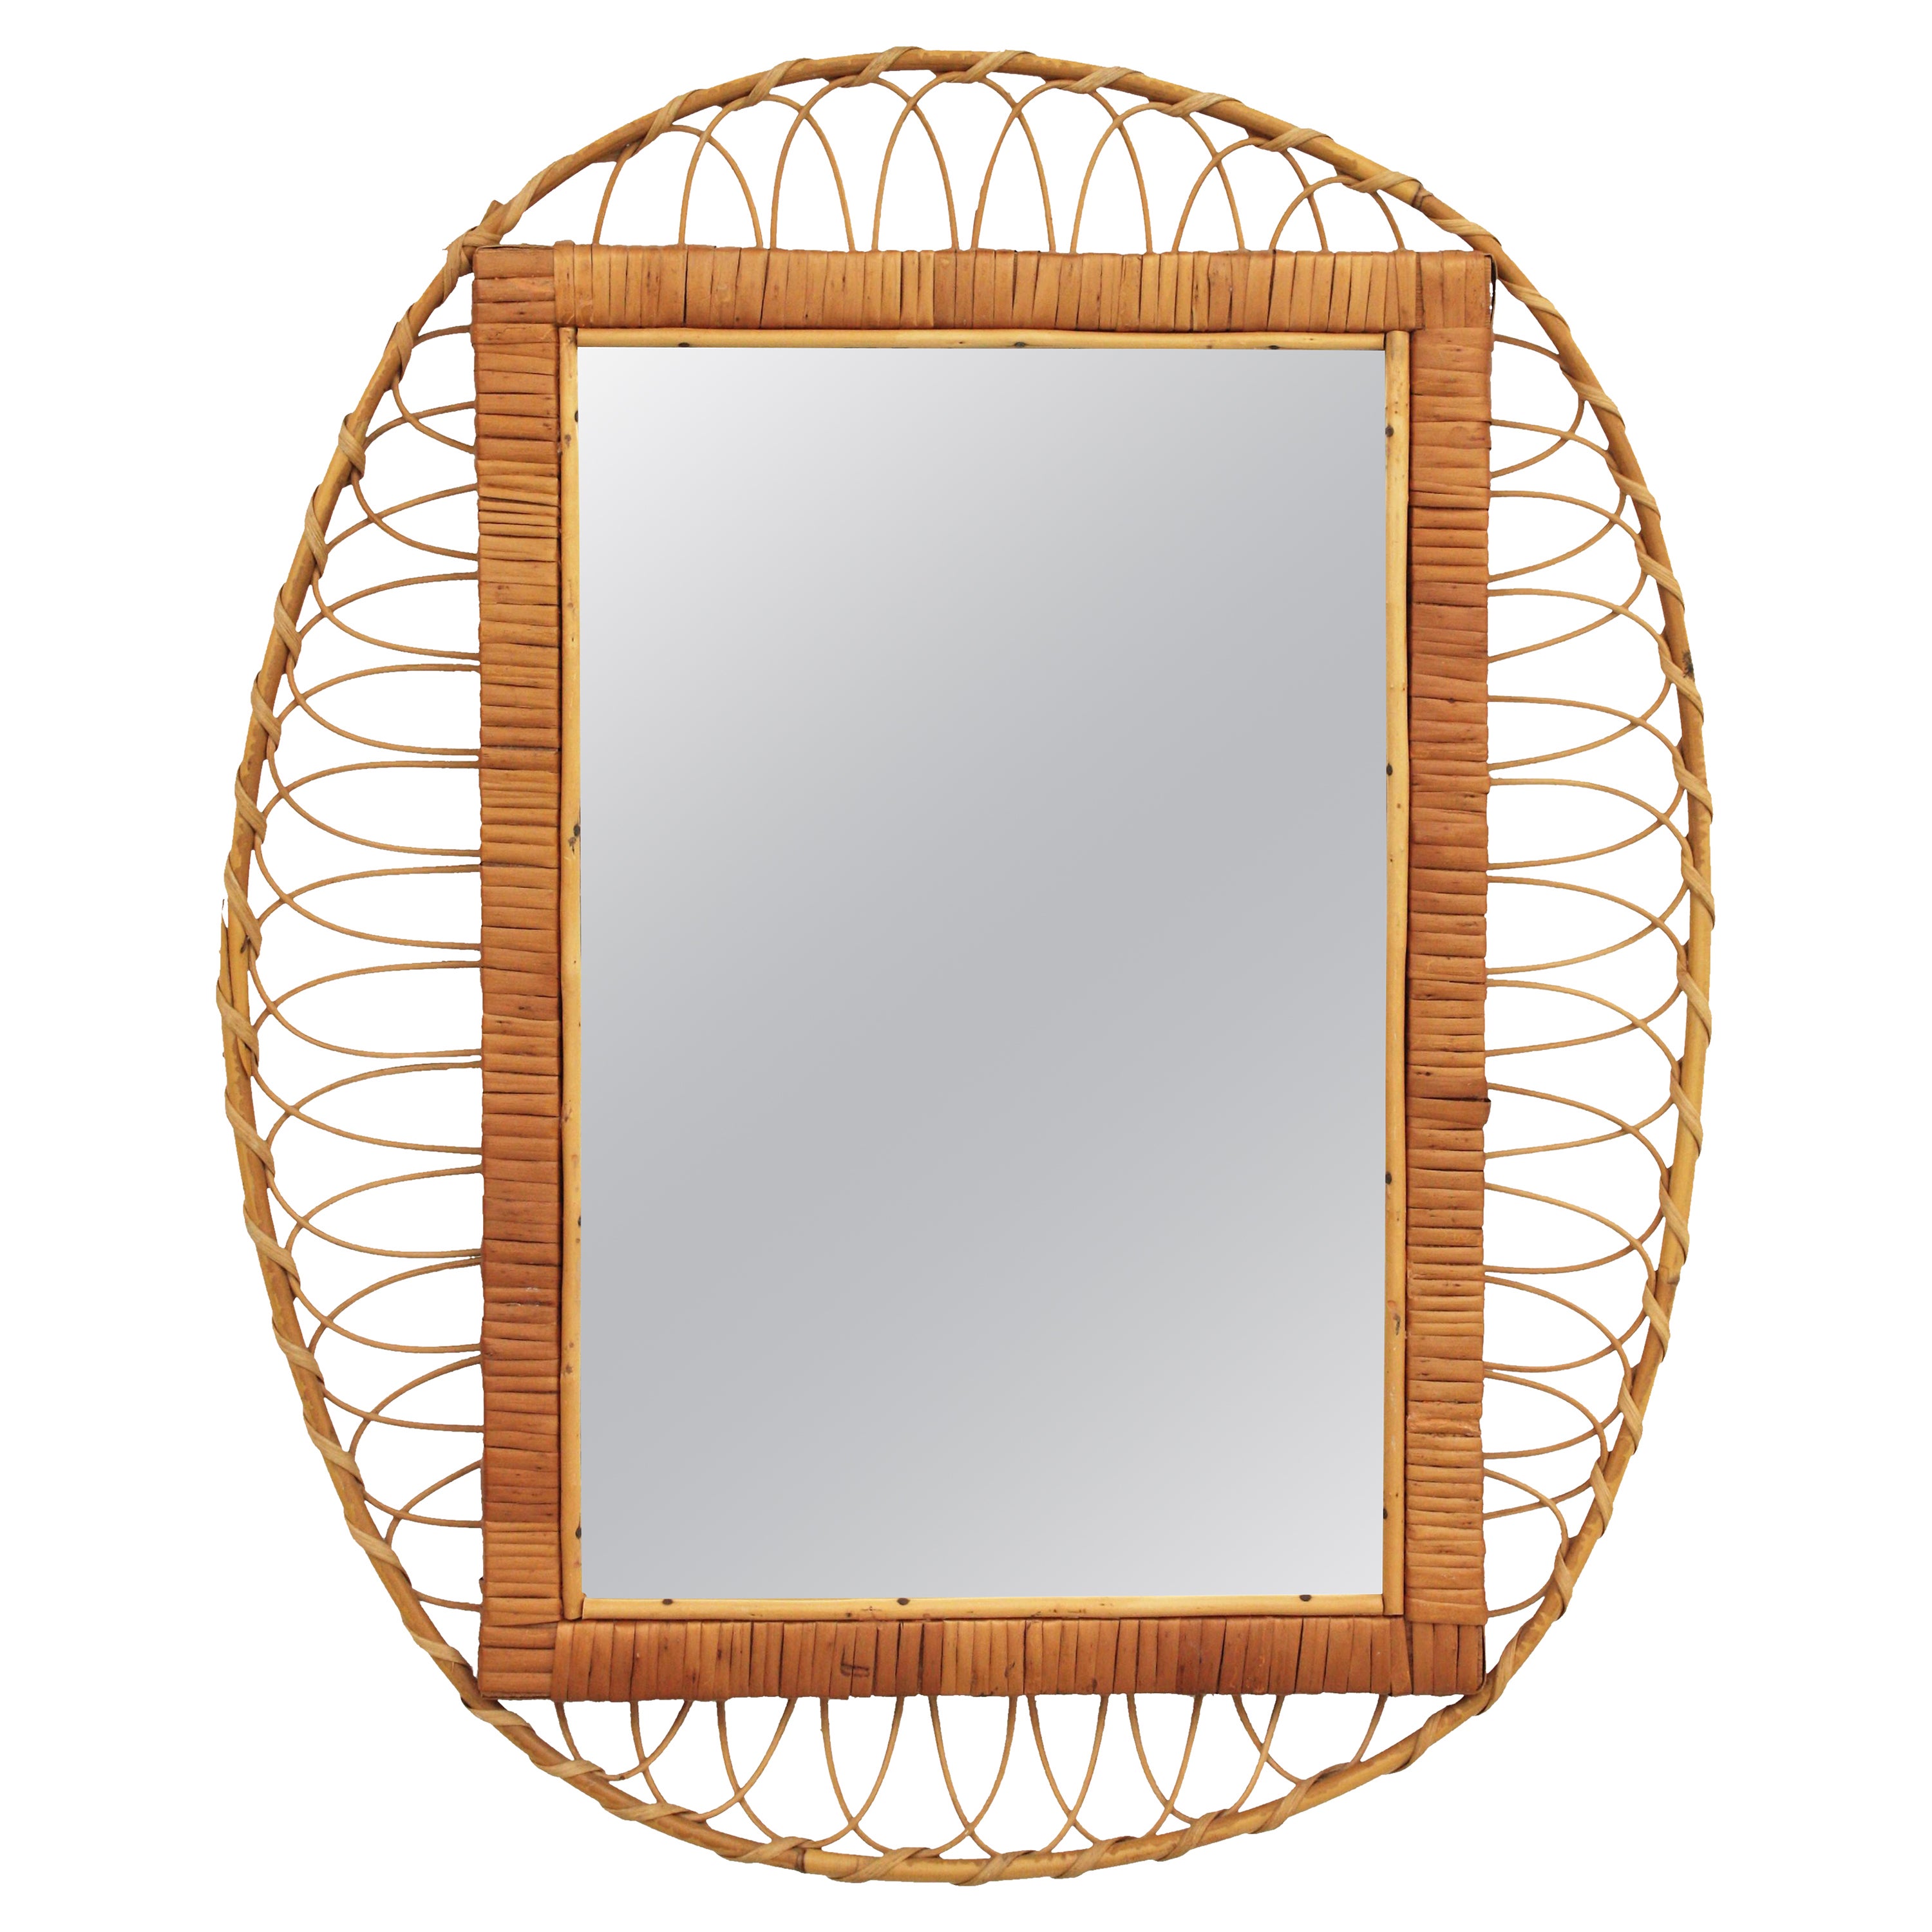 French Rattan Oval Mirror with Woven Rectangular Frame, 1960s For Sale